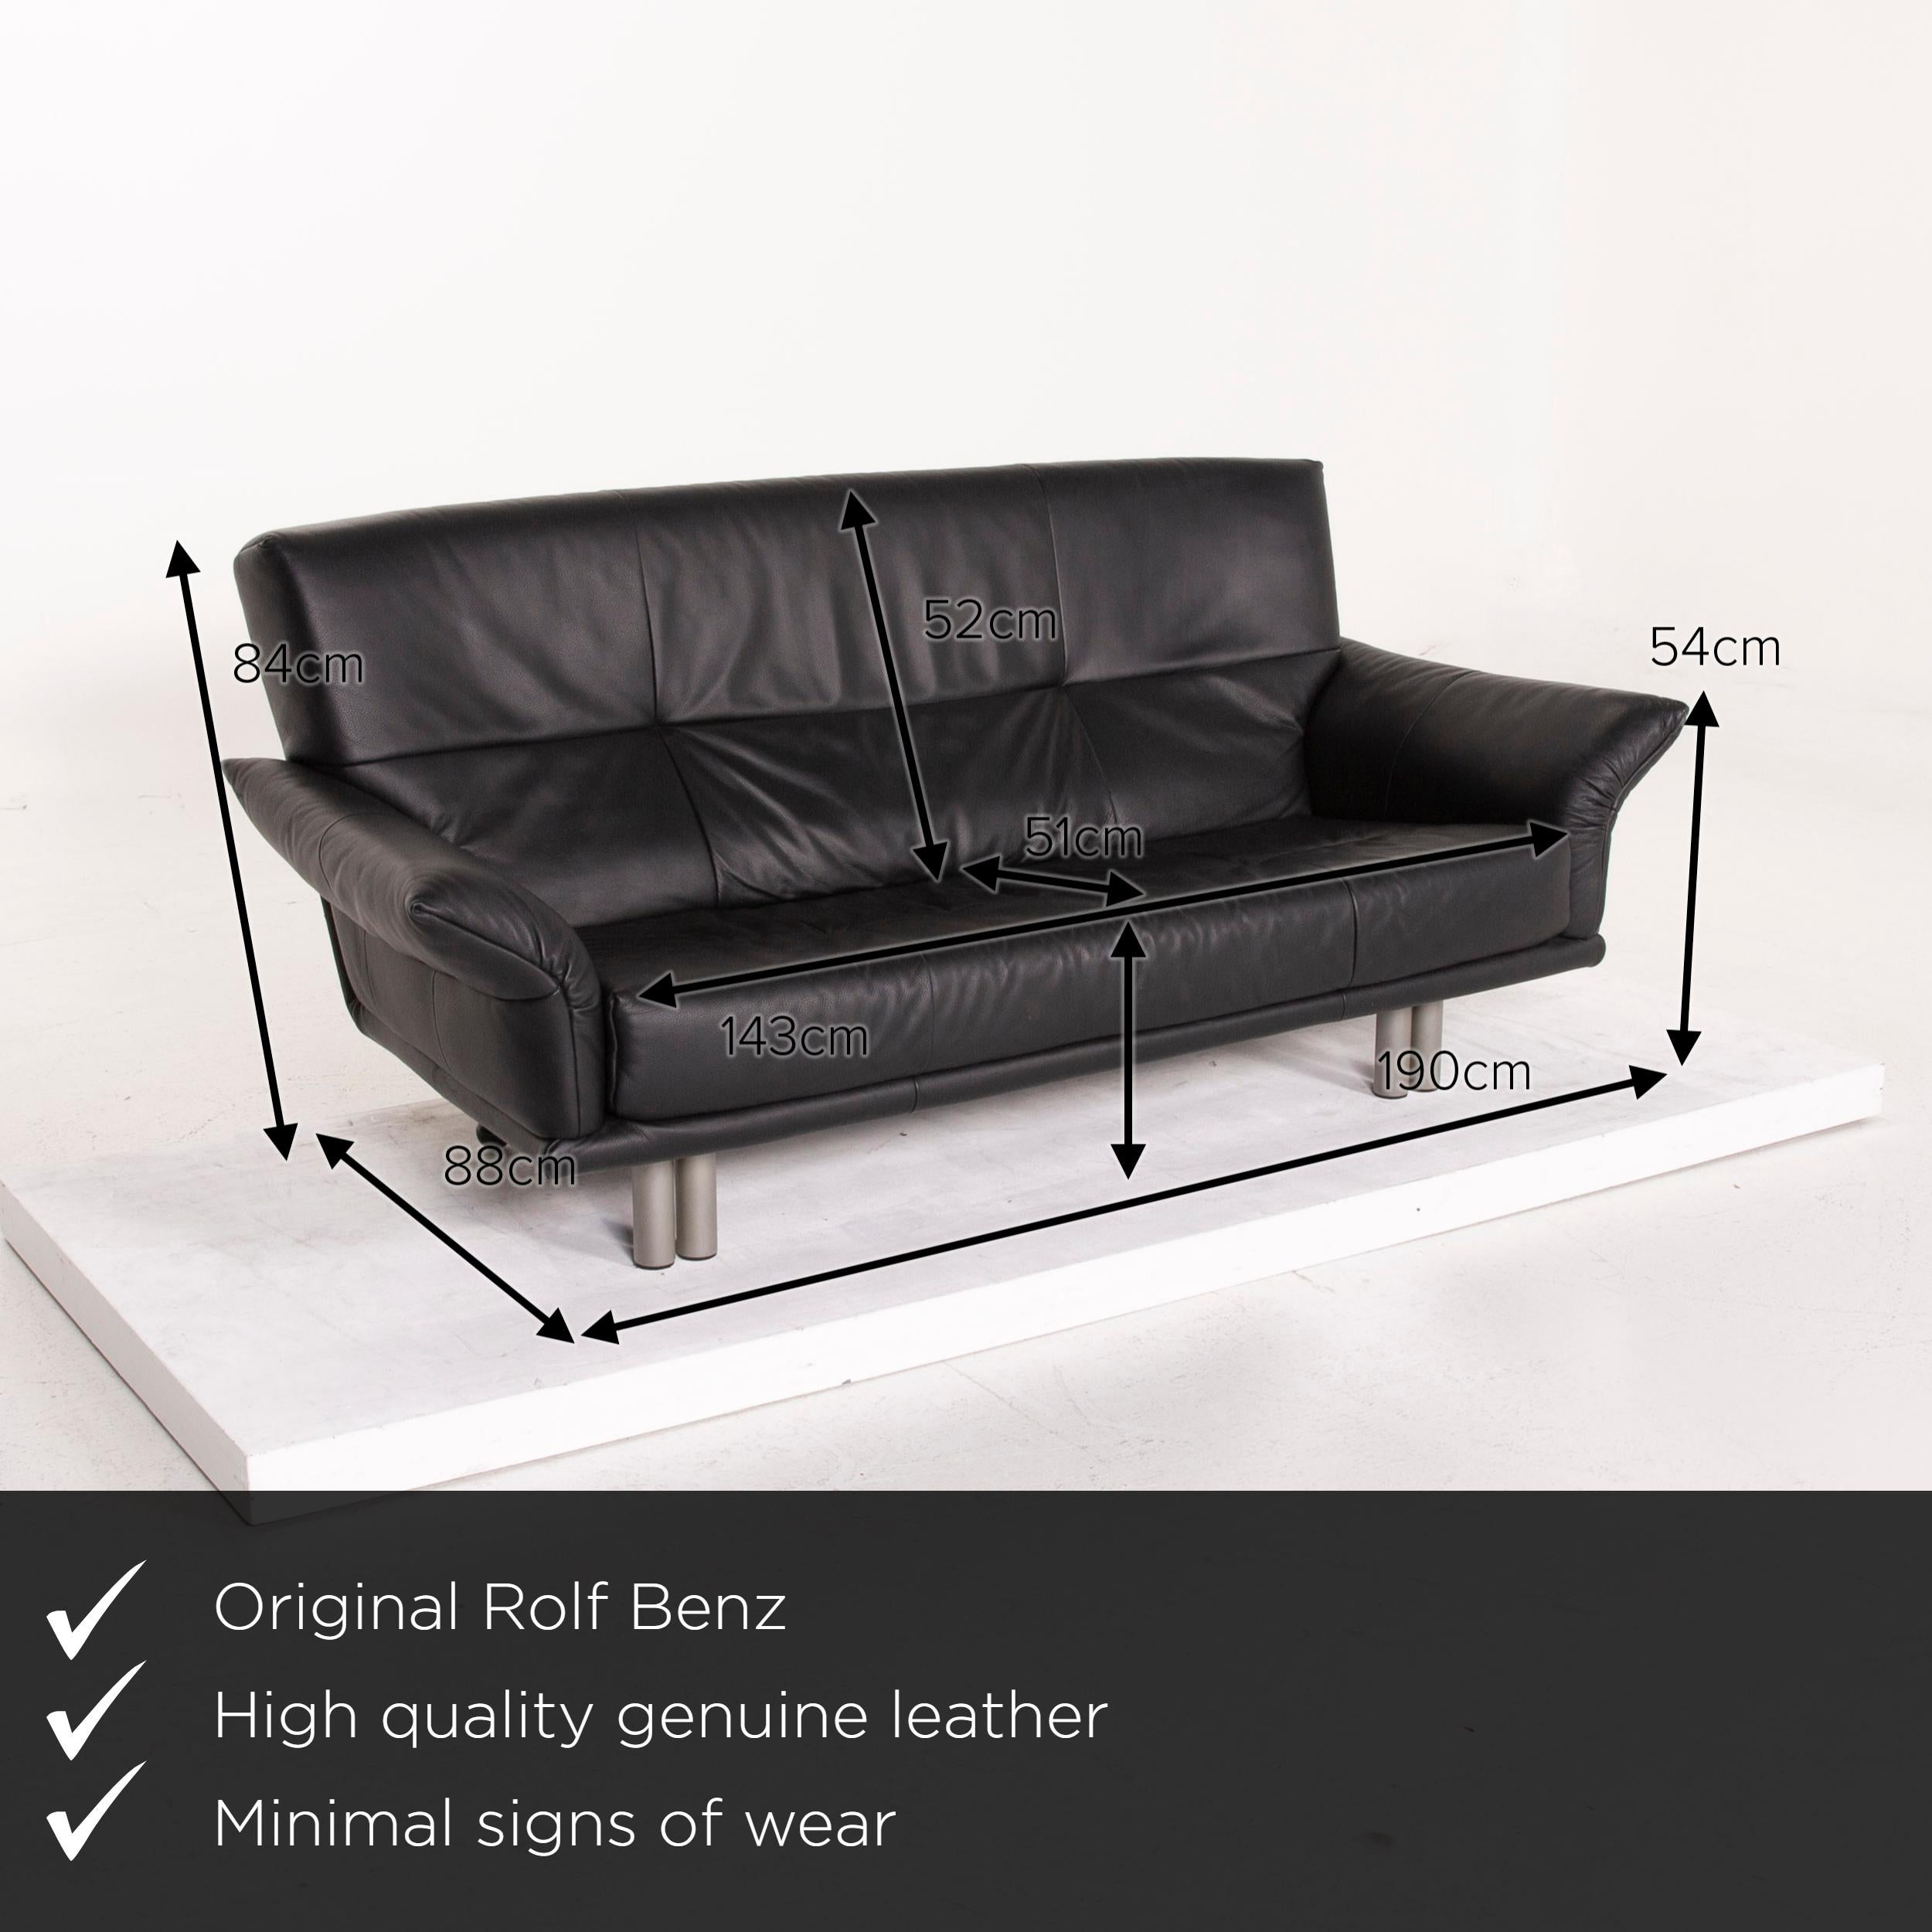 We present to you a Rolf Benz leather sofa black three-seat.

 

 Product measurements in centimetres:


 depth: 88
 width: 190
 height: 84
 seat height: 41
 rest height: 54
 seat depth: 51
 seat width: 143
 back height: 52.